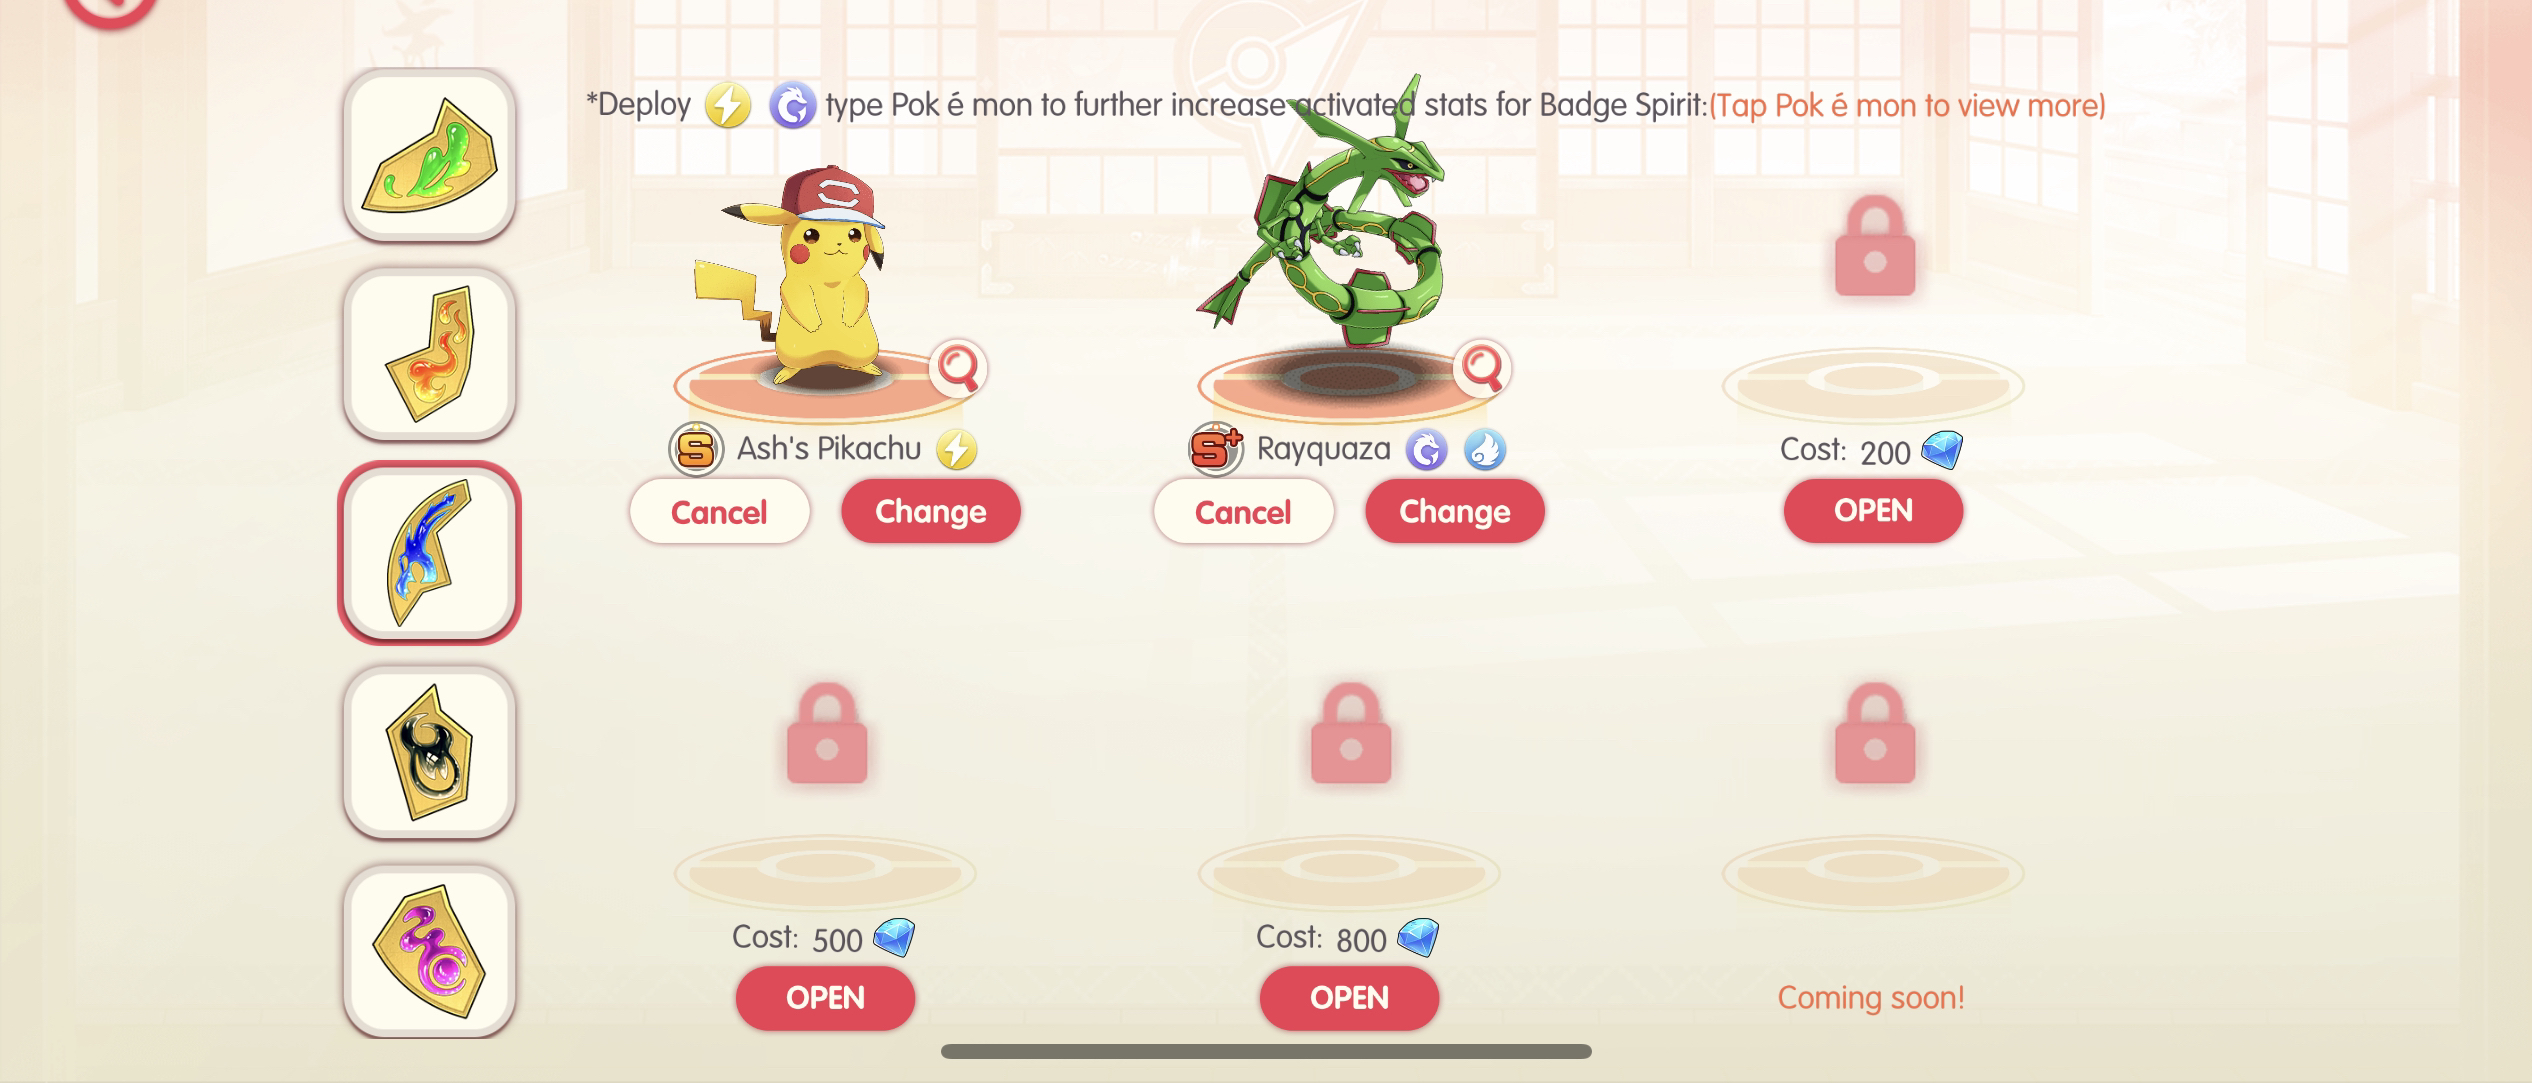 Beginner's Guide: Boost Your CP Quickly! 💪🎮